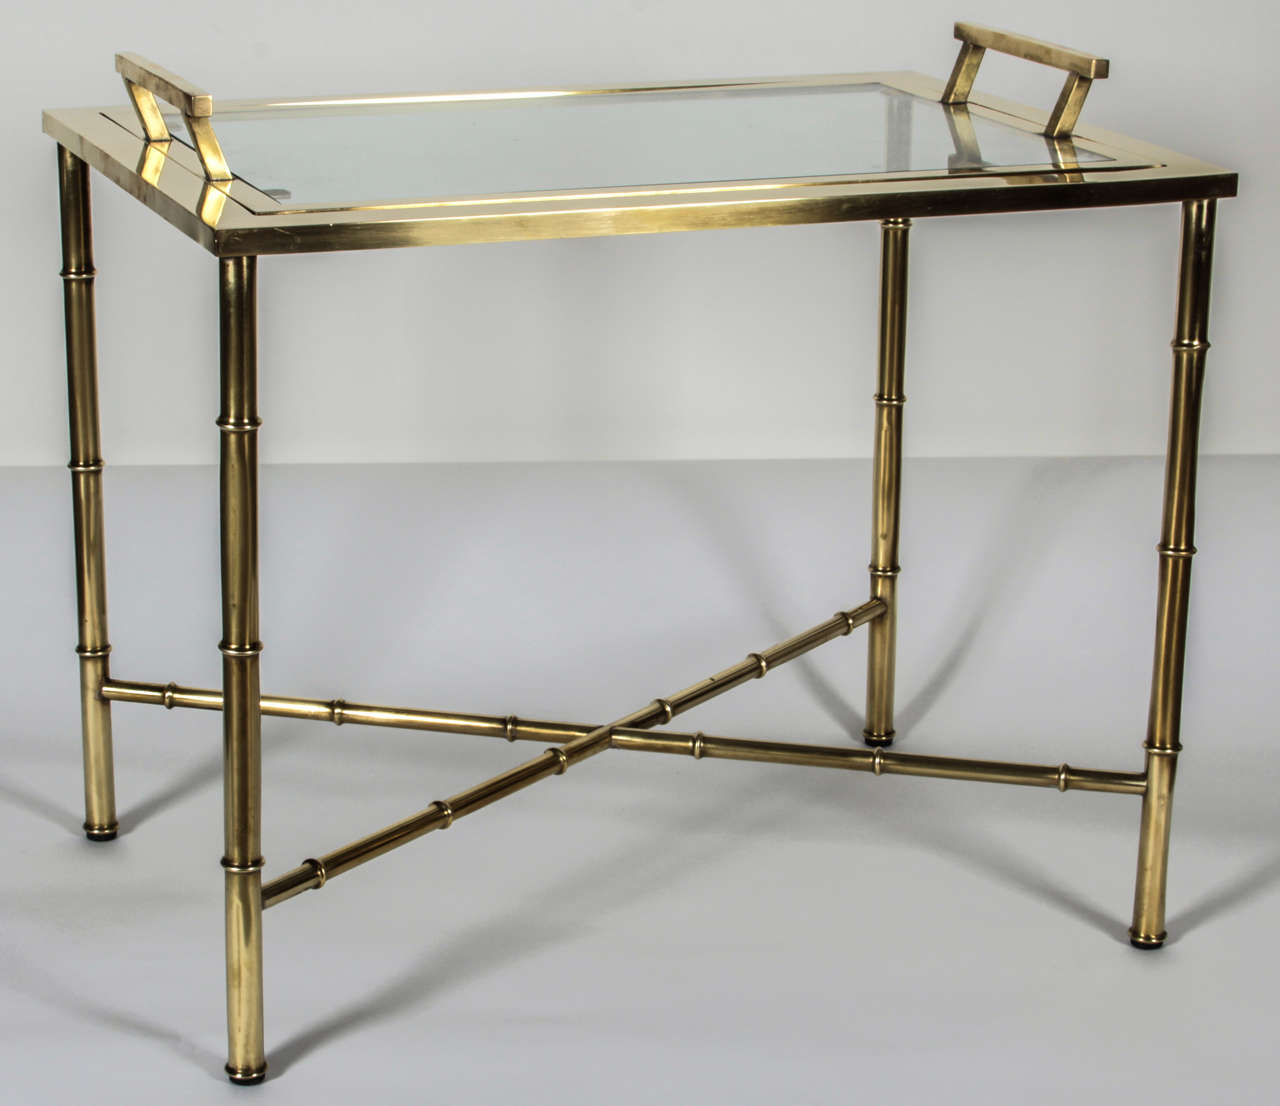 Faux bamboo legs and cross stretchers support a polished brass frame holding a removable glass serving tray. Fine Italian craftsmanship. Paper 